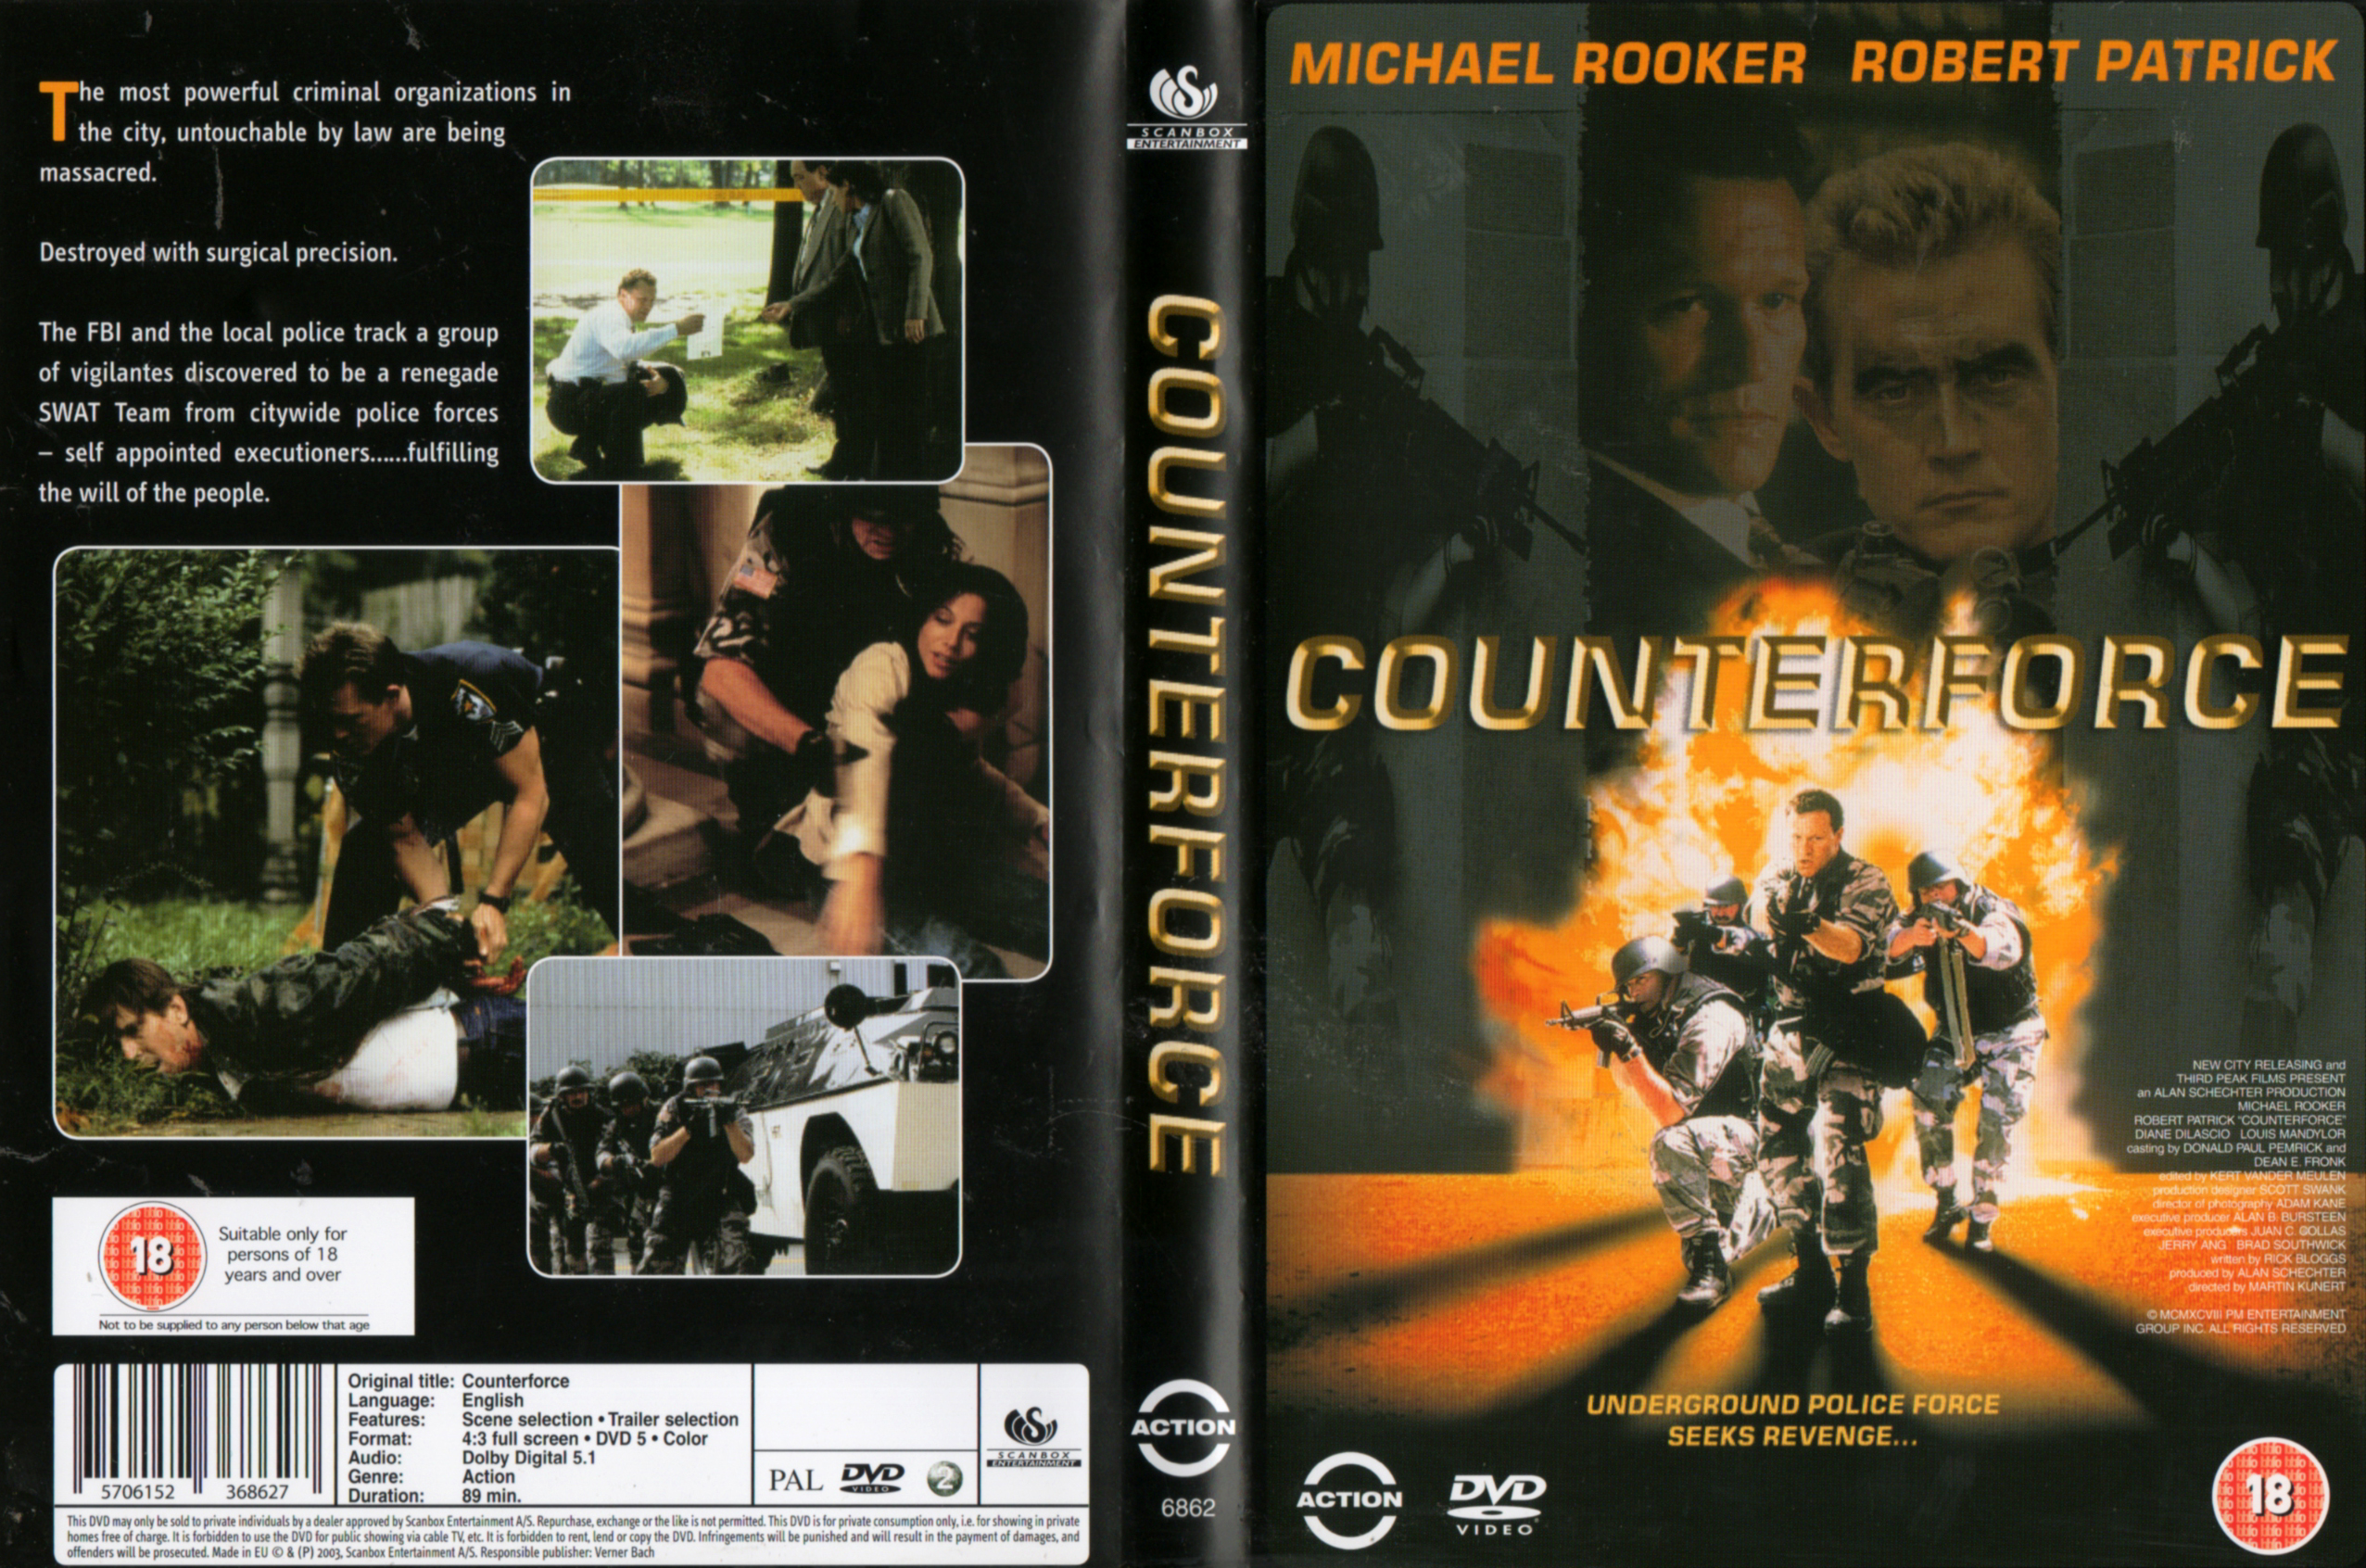 Jaquette DVD Counterforce